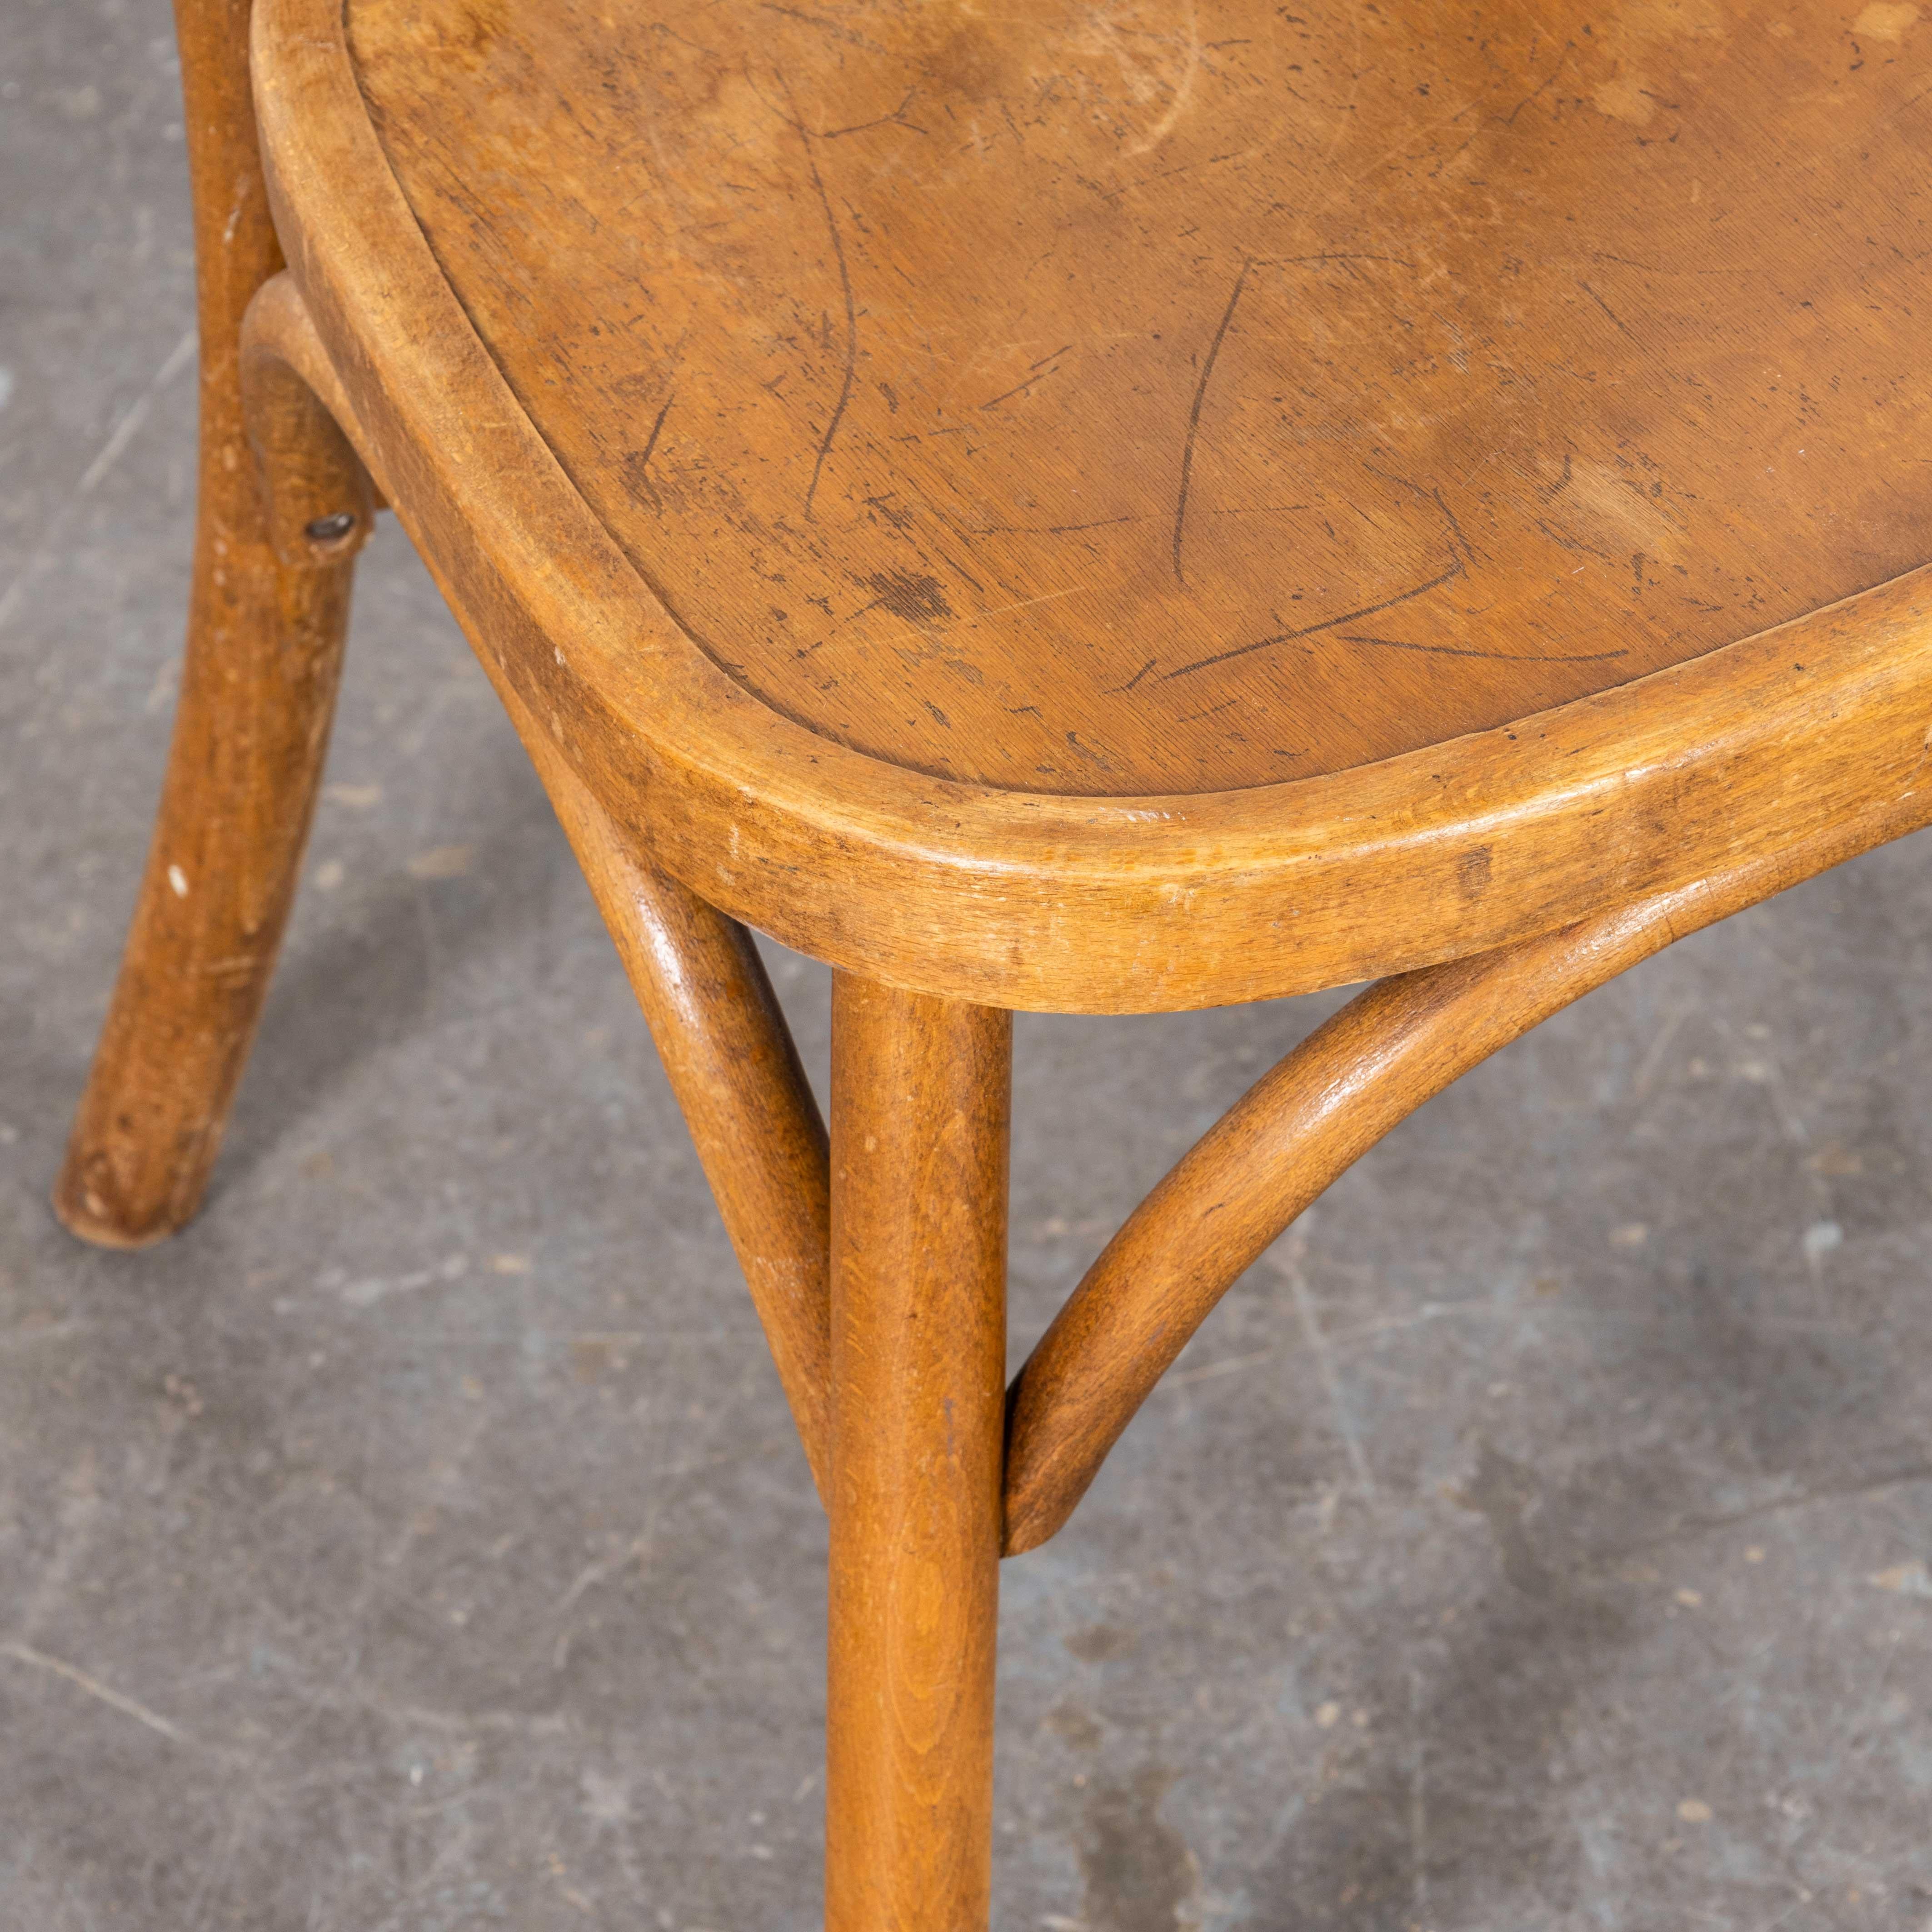 1950’s Fischel Hooped Back Classic Dining Chairs – Set Of Six
1950’s Fischel Hooped Back Classic Dining Chairs – Set Of Six The process of steam bending beech to create elegant chairs was discovered and developed by Thonet, but when its patents